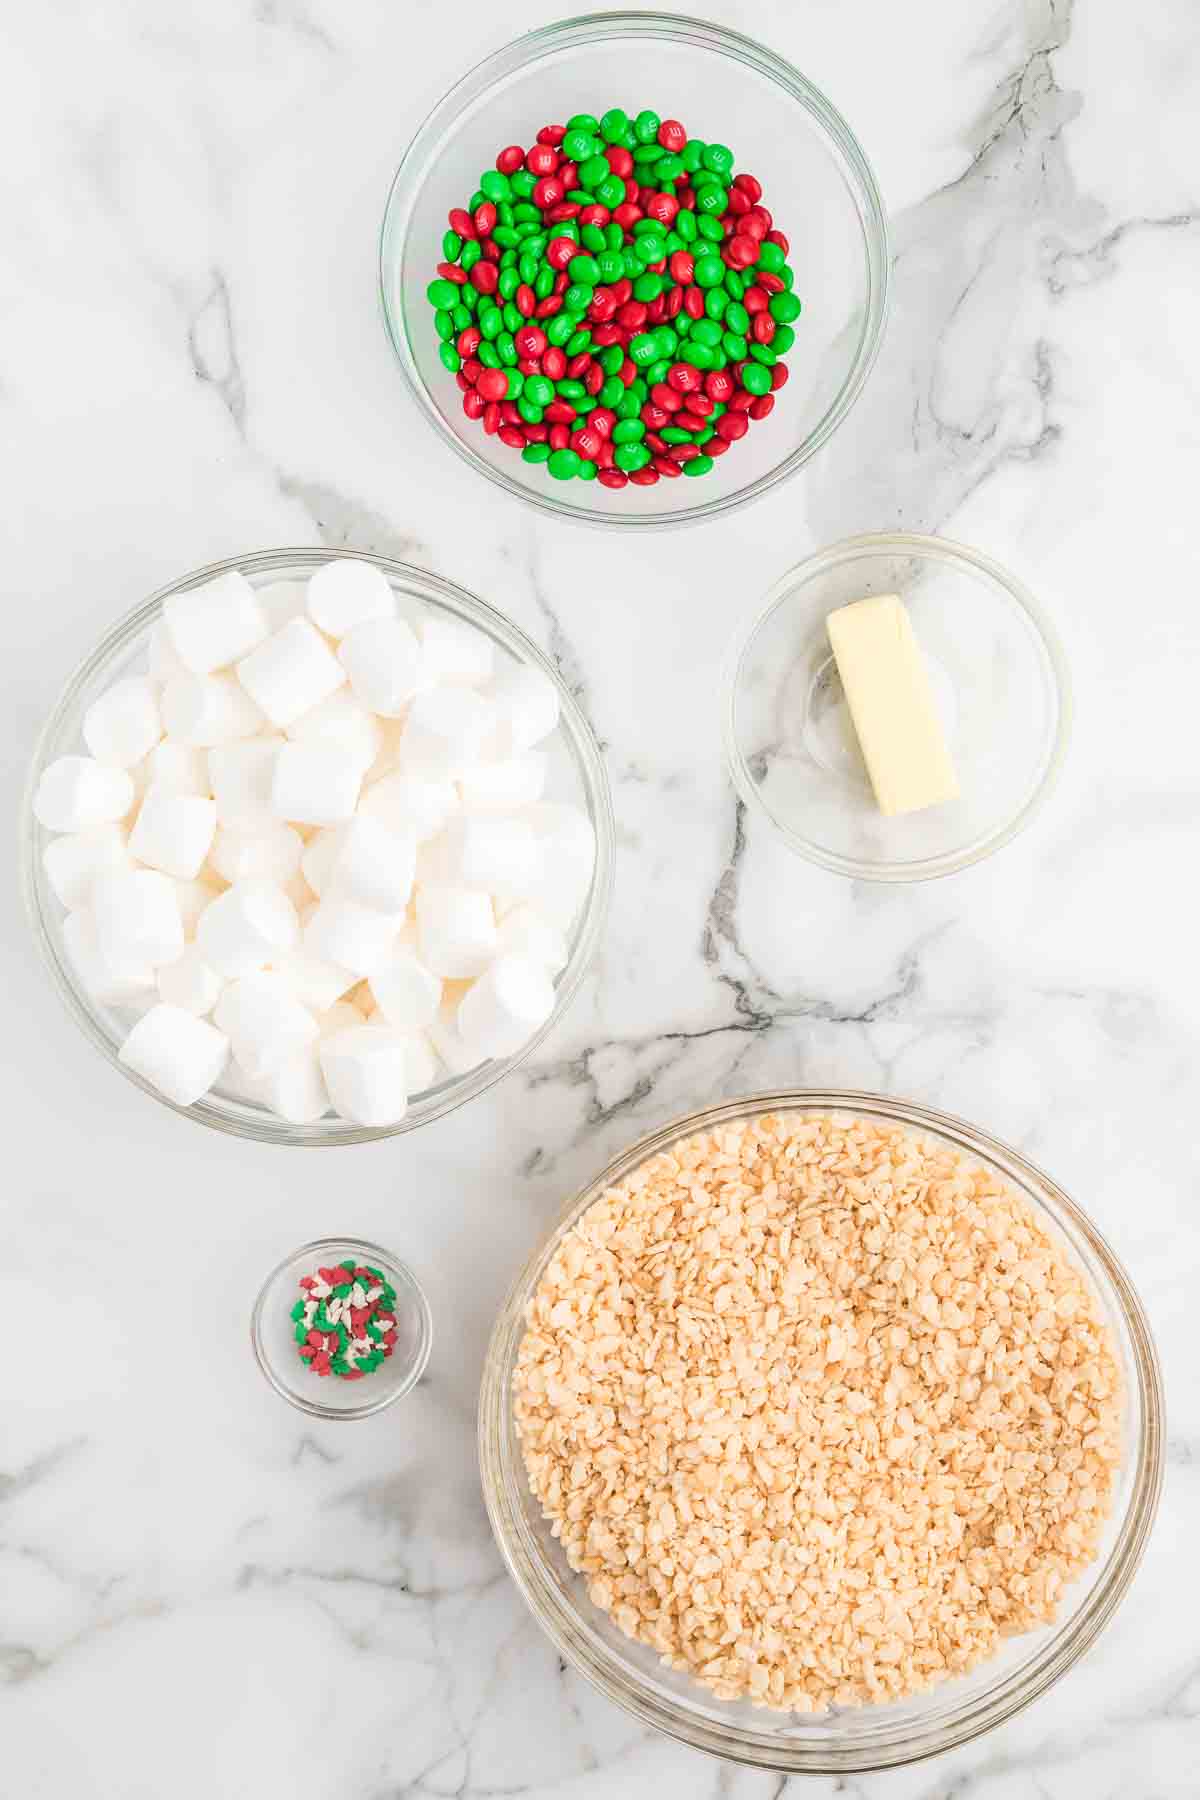 Ingredients needed - rice krispie cereal, butter, marshmallows, red and green m&ms christmas sprinkles